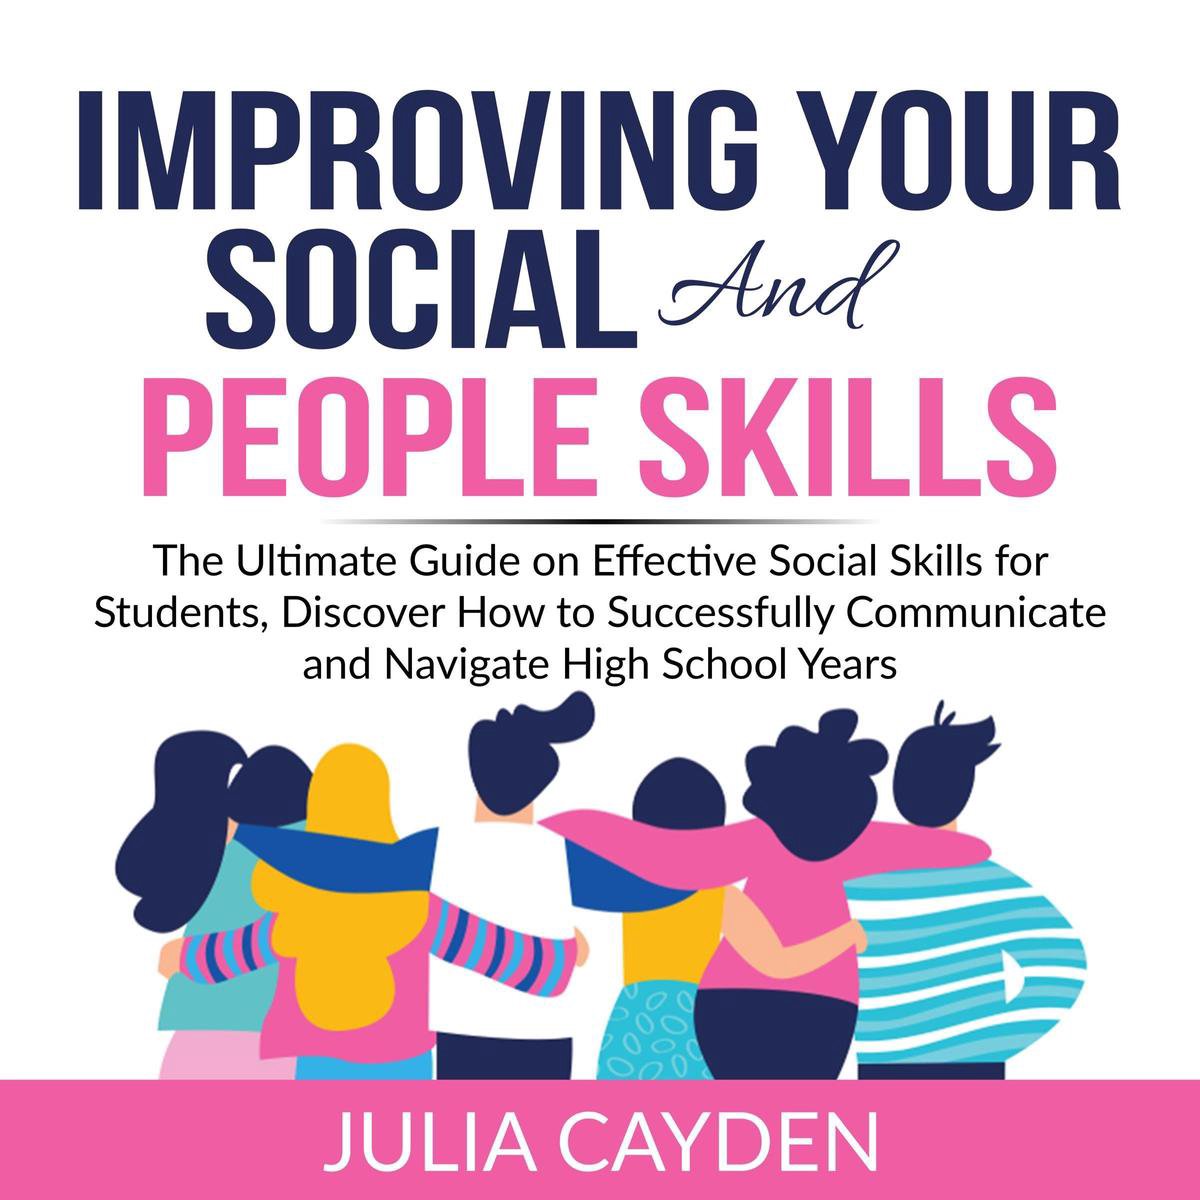 Improving Your Social and People Skills: The Ultimate Guide on Effective Social Skills for Students, Discover How to Successfully Communicate and Navigate High School Years - Julia Cayden